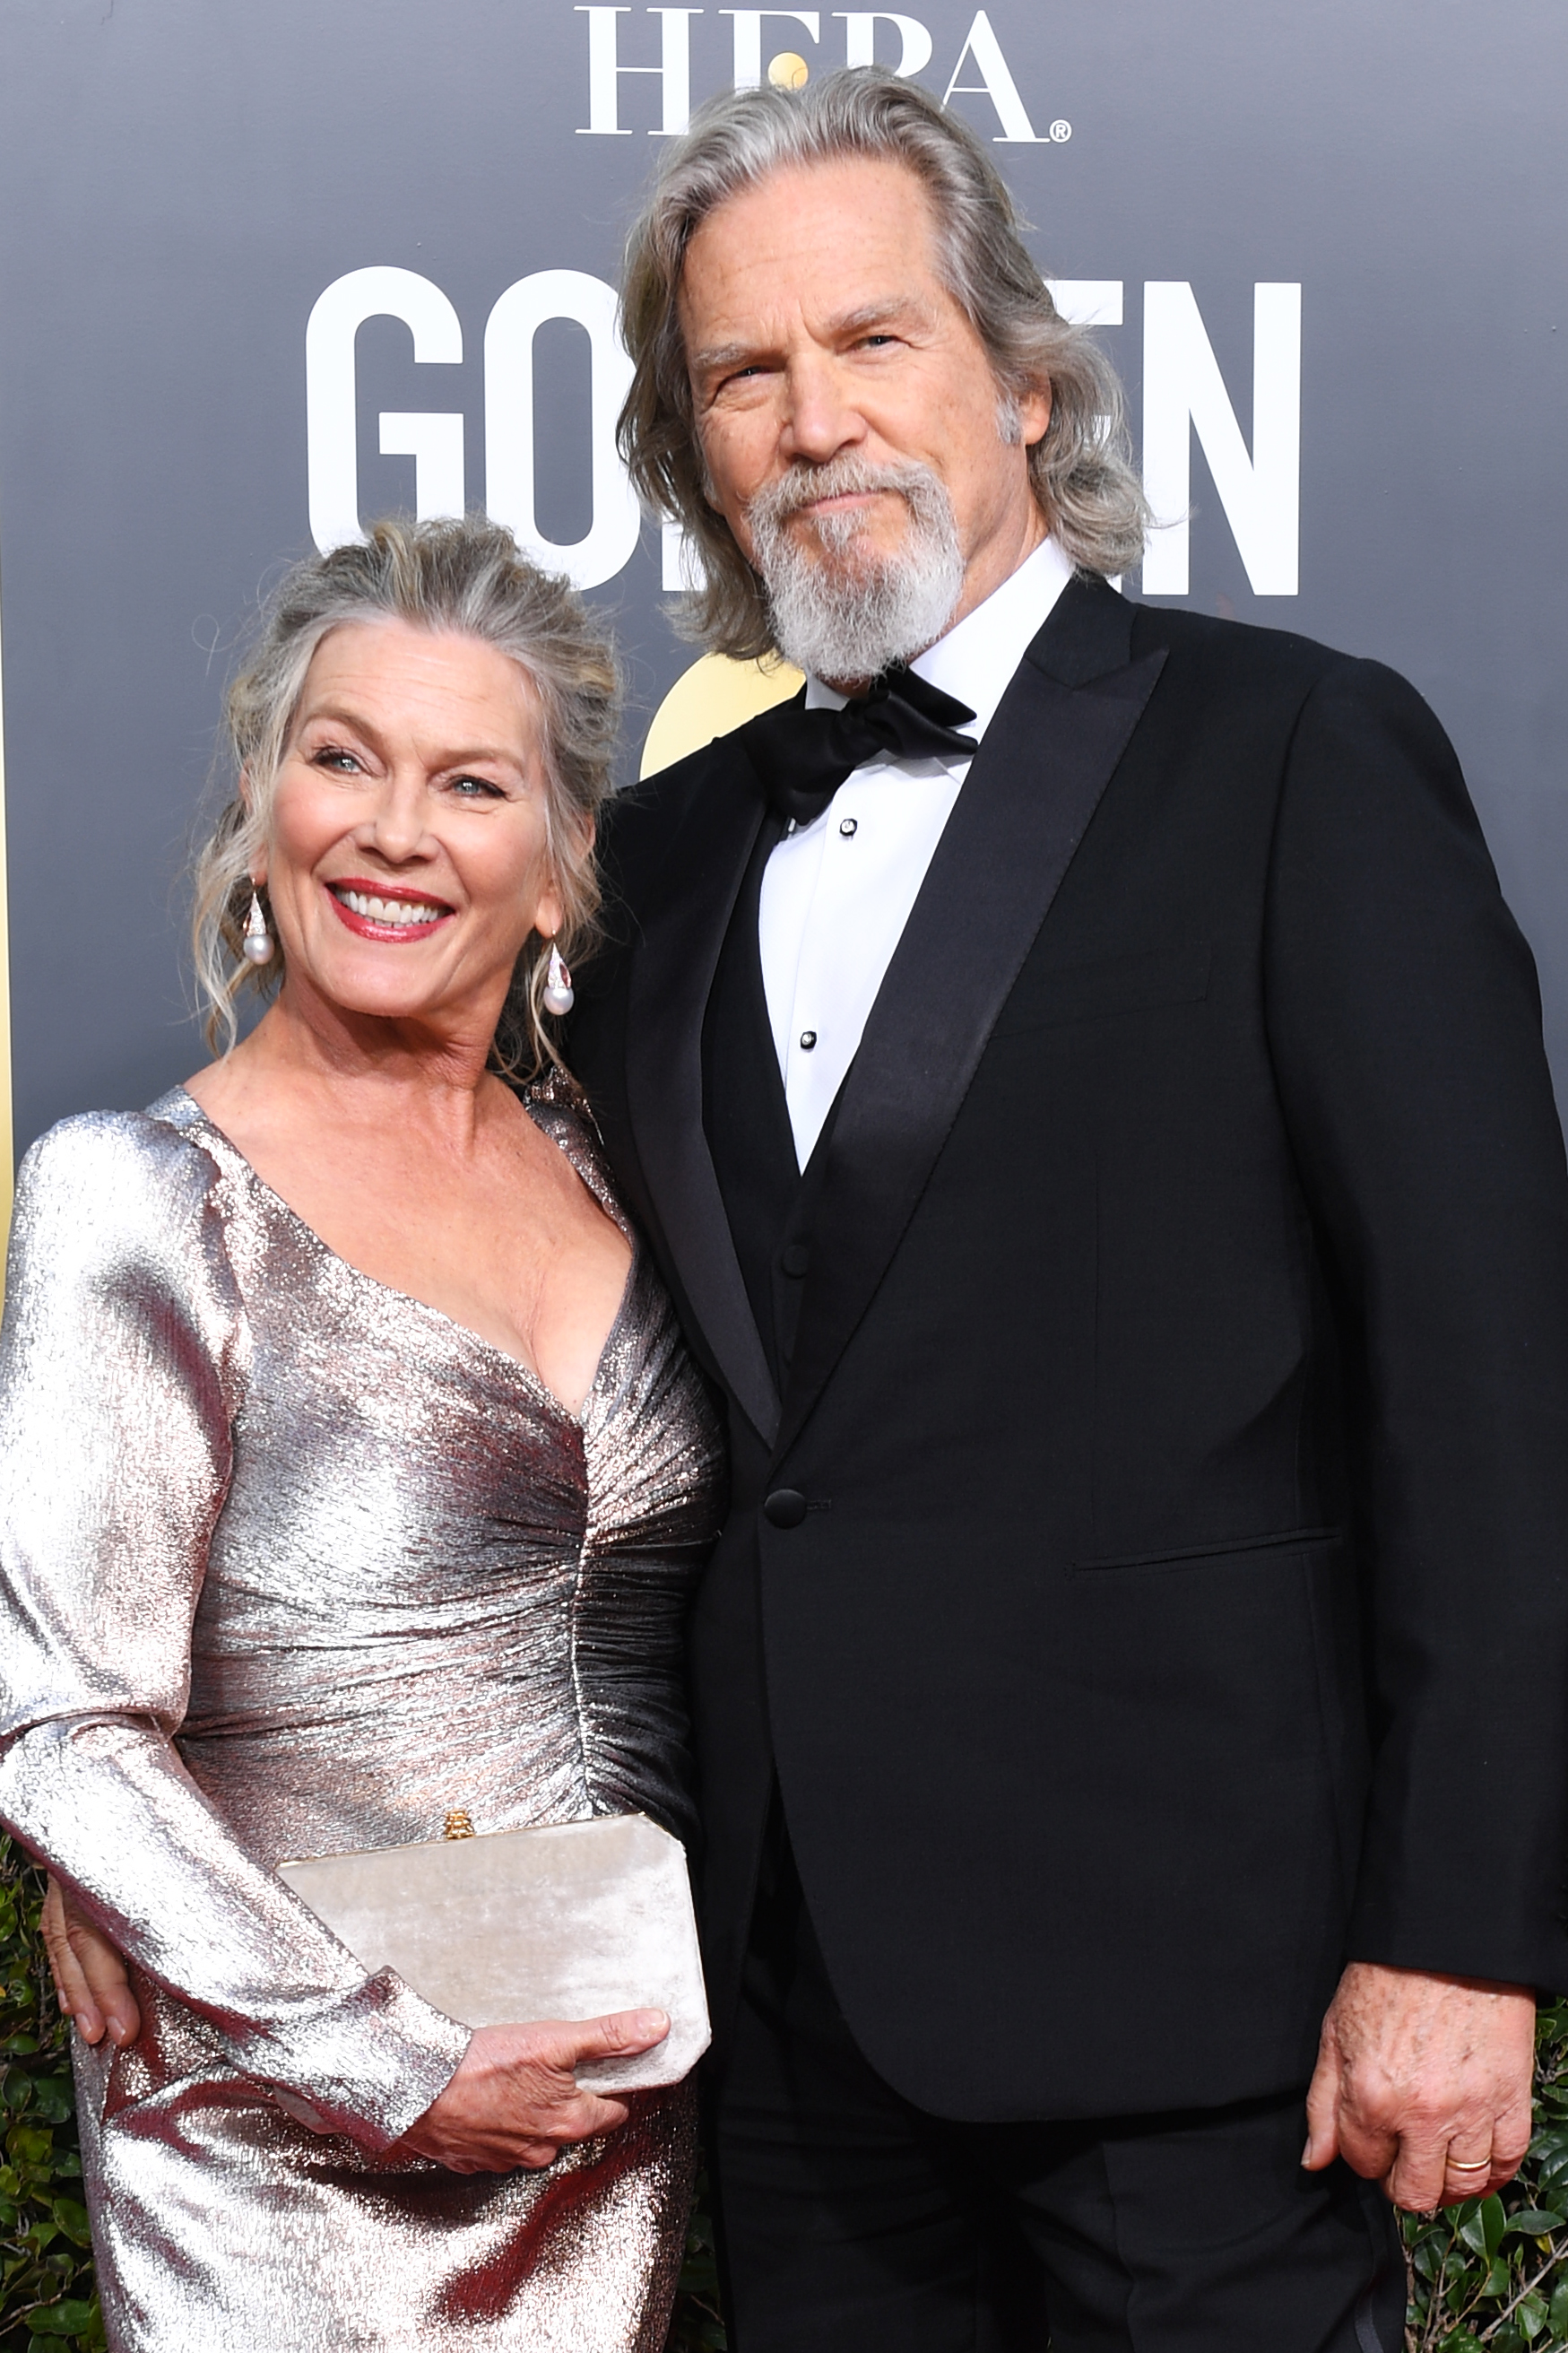 Susan and Jeff Bridges arrive for the 76th annual Golden Globe Awards in Beverly Hills, California, on January 6, 2019. | Source: Getty Images